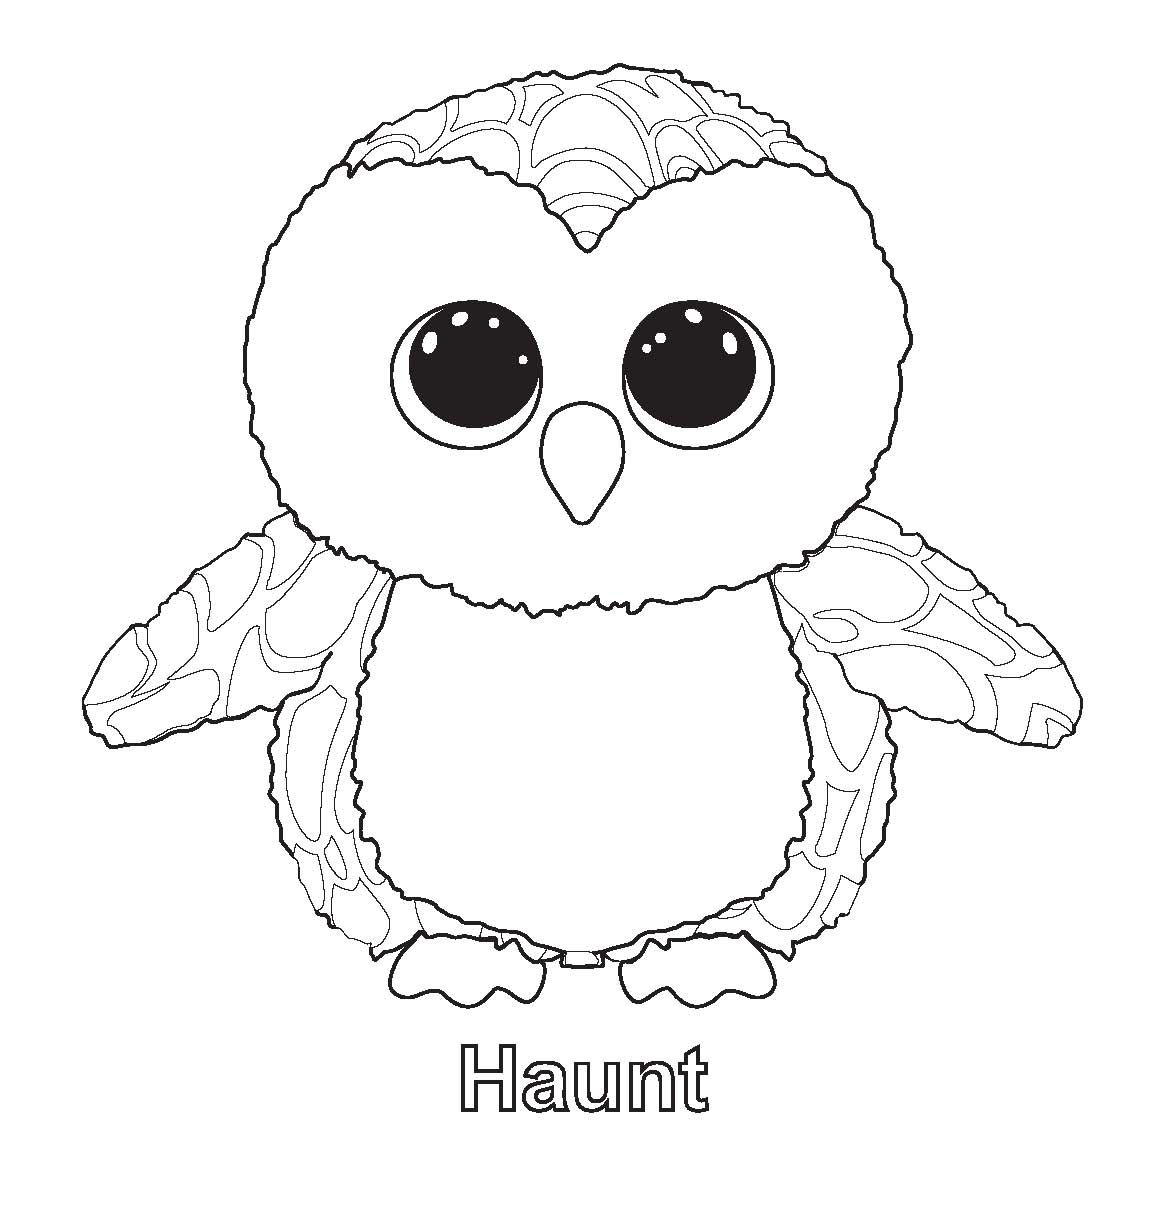 Haunt Beanie Boo Coloring Pages